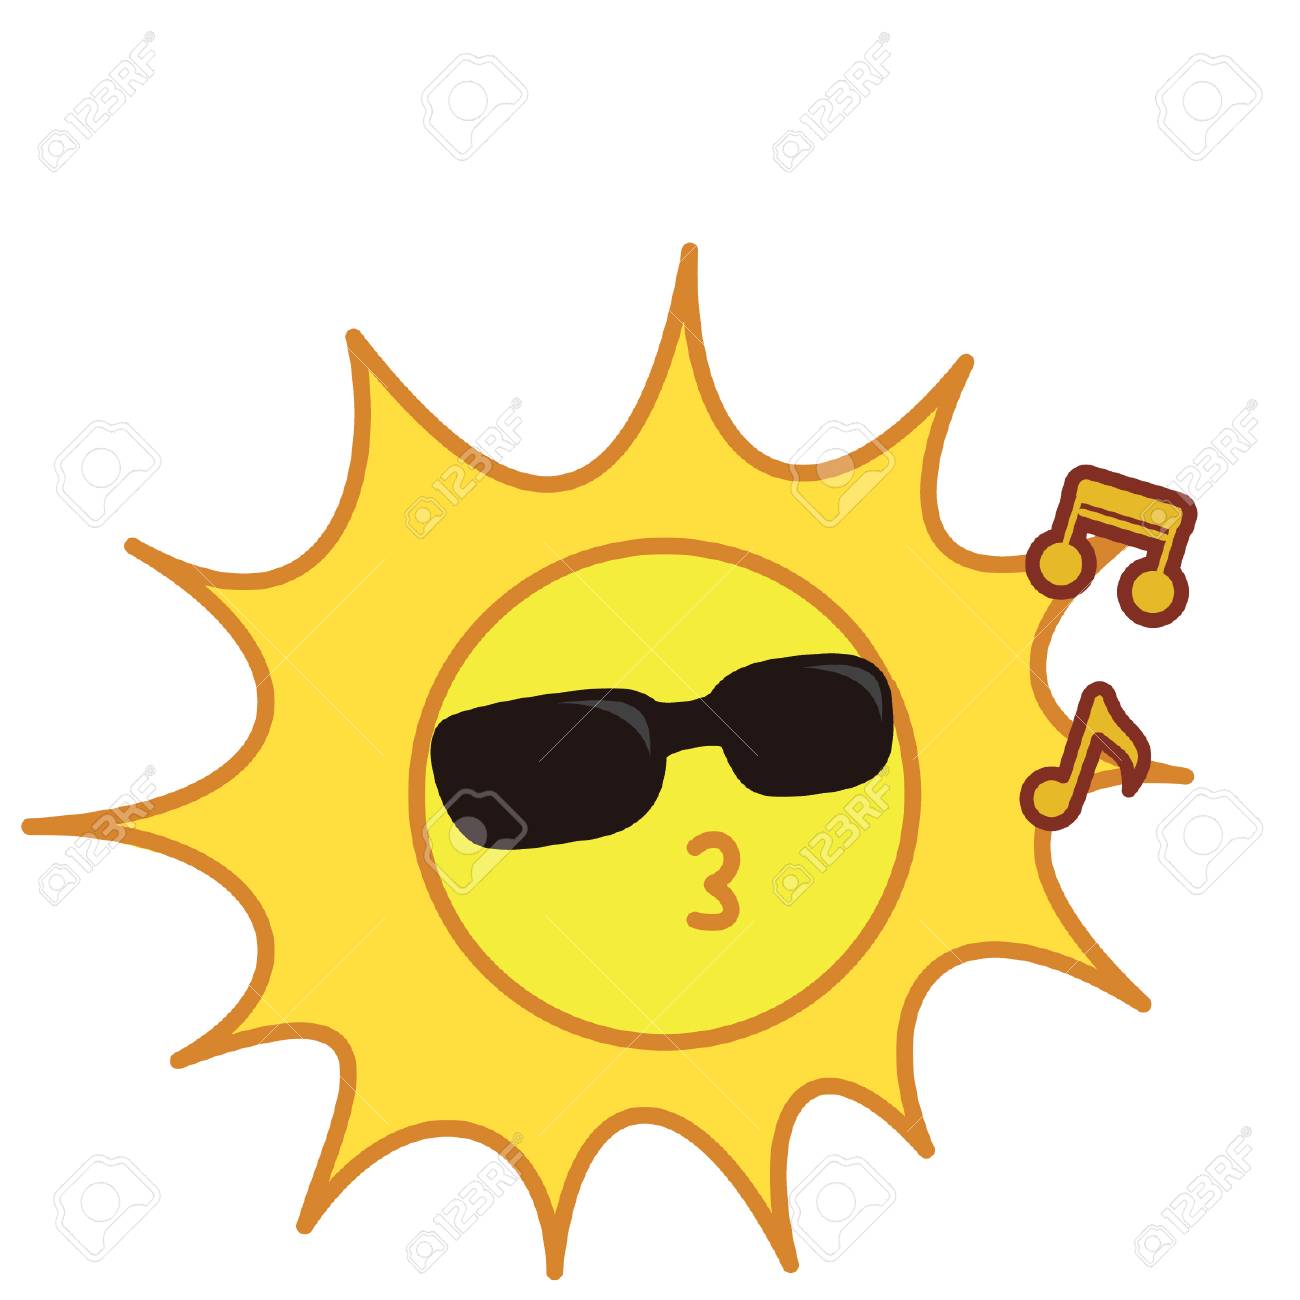 Cool sun character whistling.